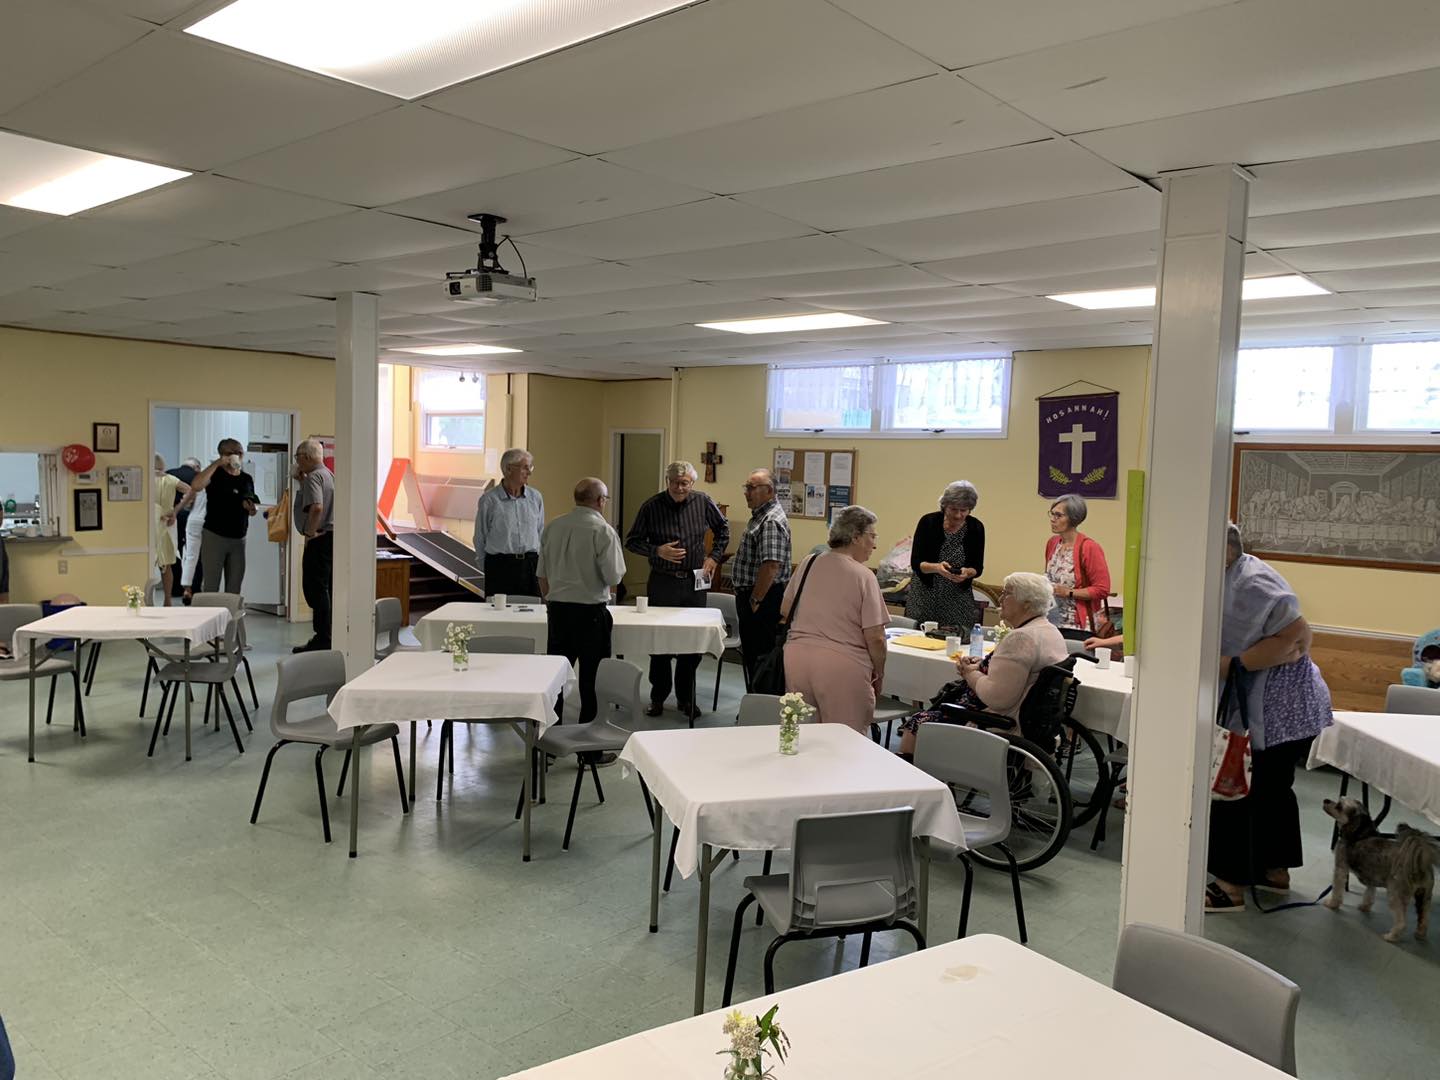 Our first Cafe Church was held in St. Luke's Parish Hall on Sunday, July 23rd. It was great to see so many people.